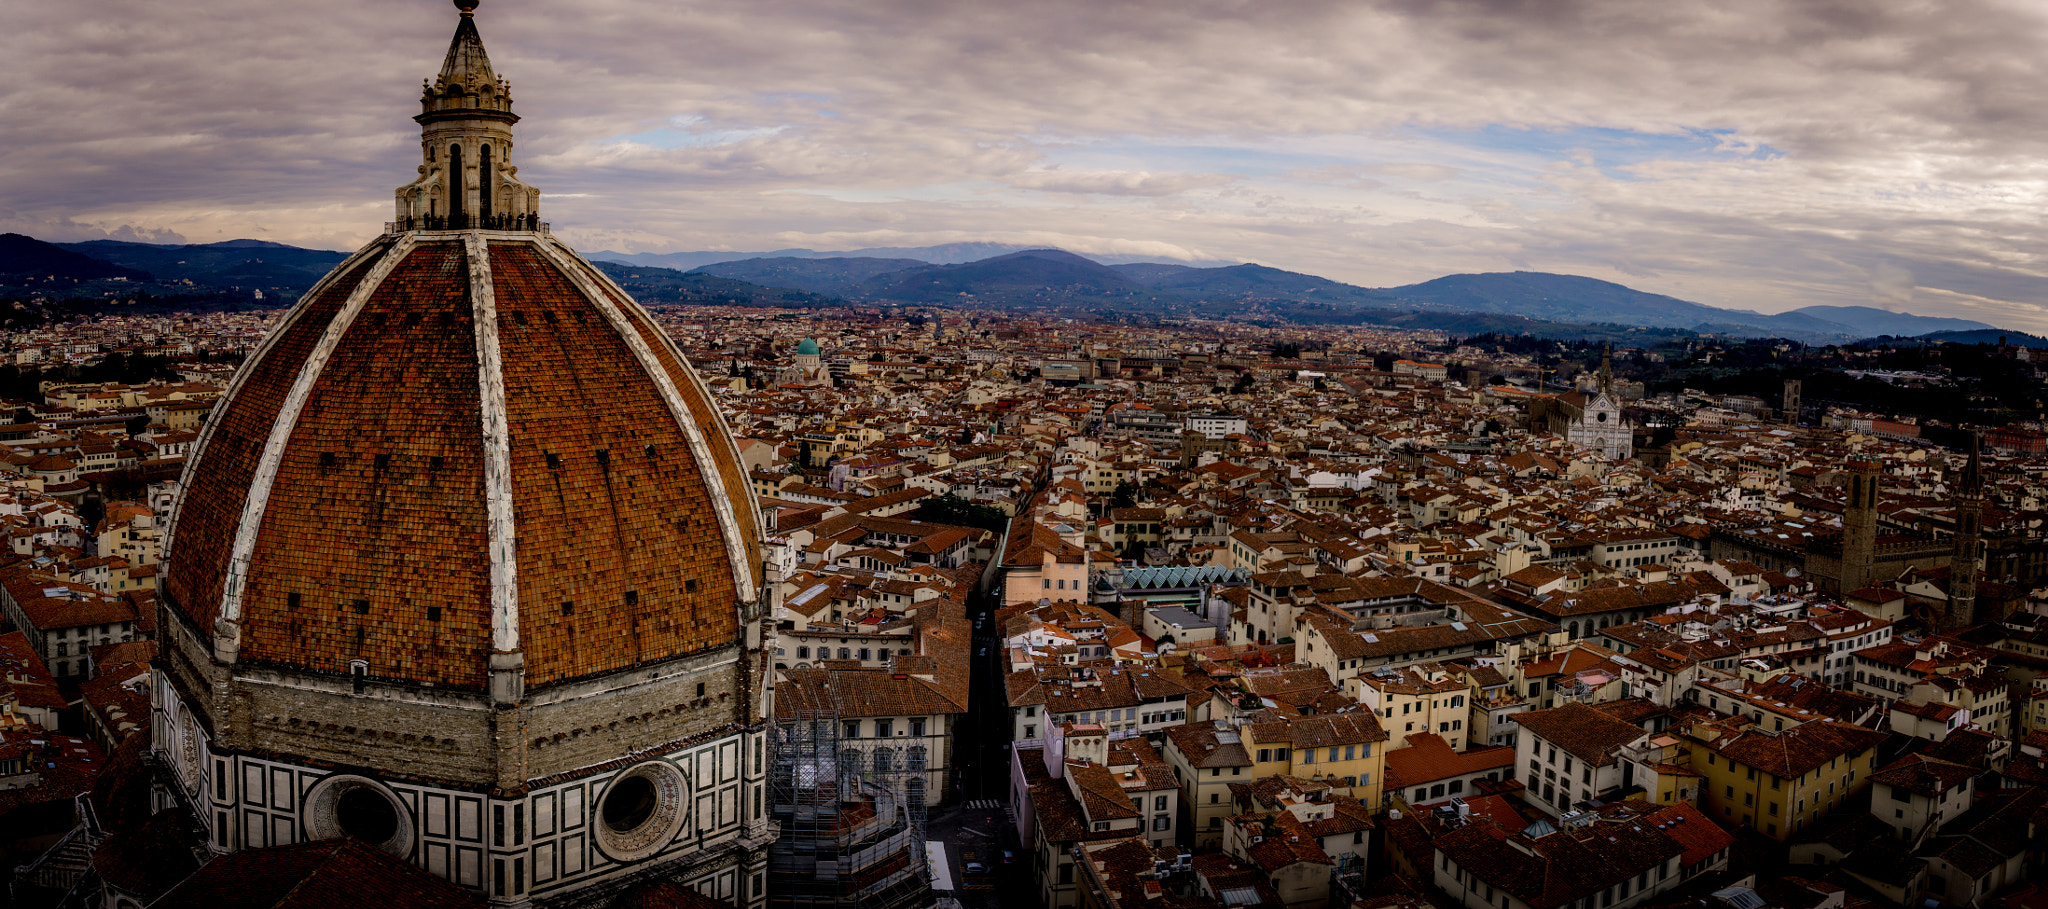 Sony a6000 sample photo. Duomo view of the city photography